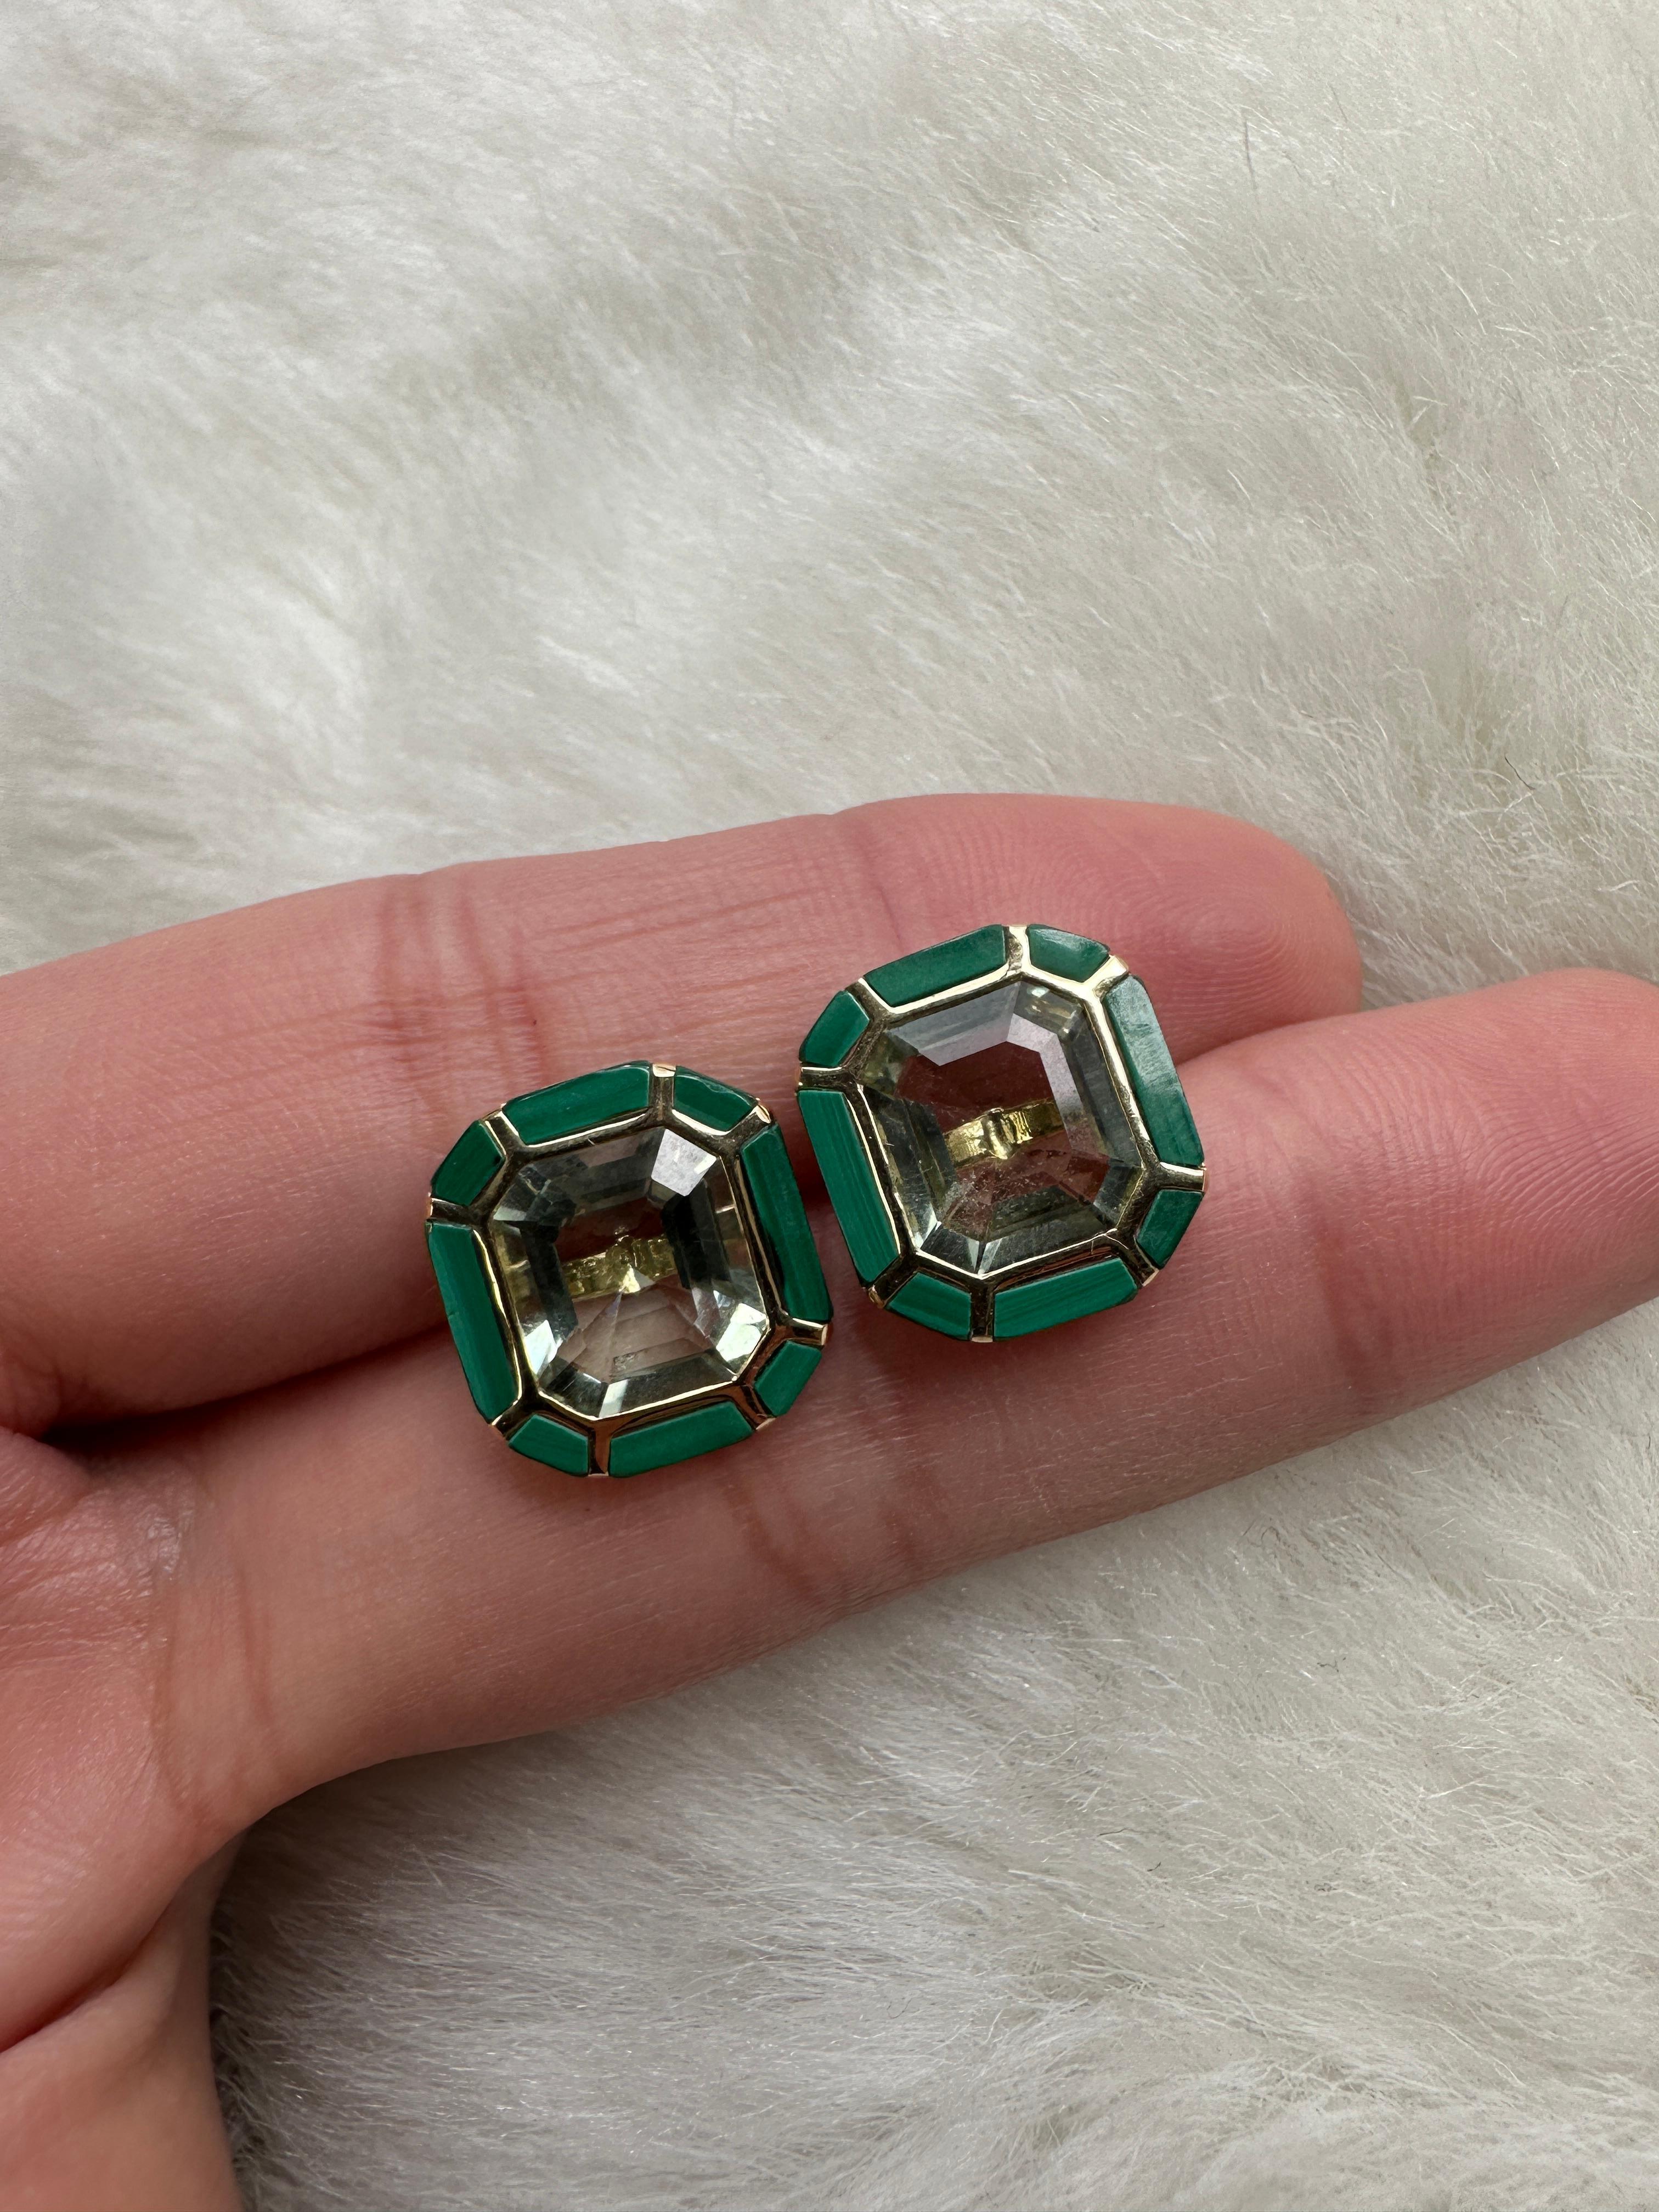 The Prasiolite & Malachite Stud Earrings from the 'Melange' Collection showcase a captivating blend of elegance and charm. Crafted with exquisite attention to detail, these earrings feature stunning emerald cut Prasiolite and Malachite gemstones set